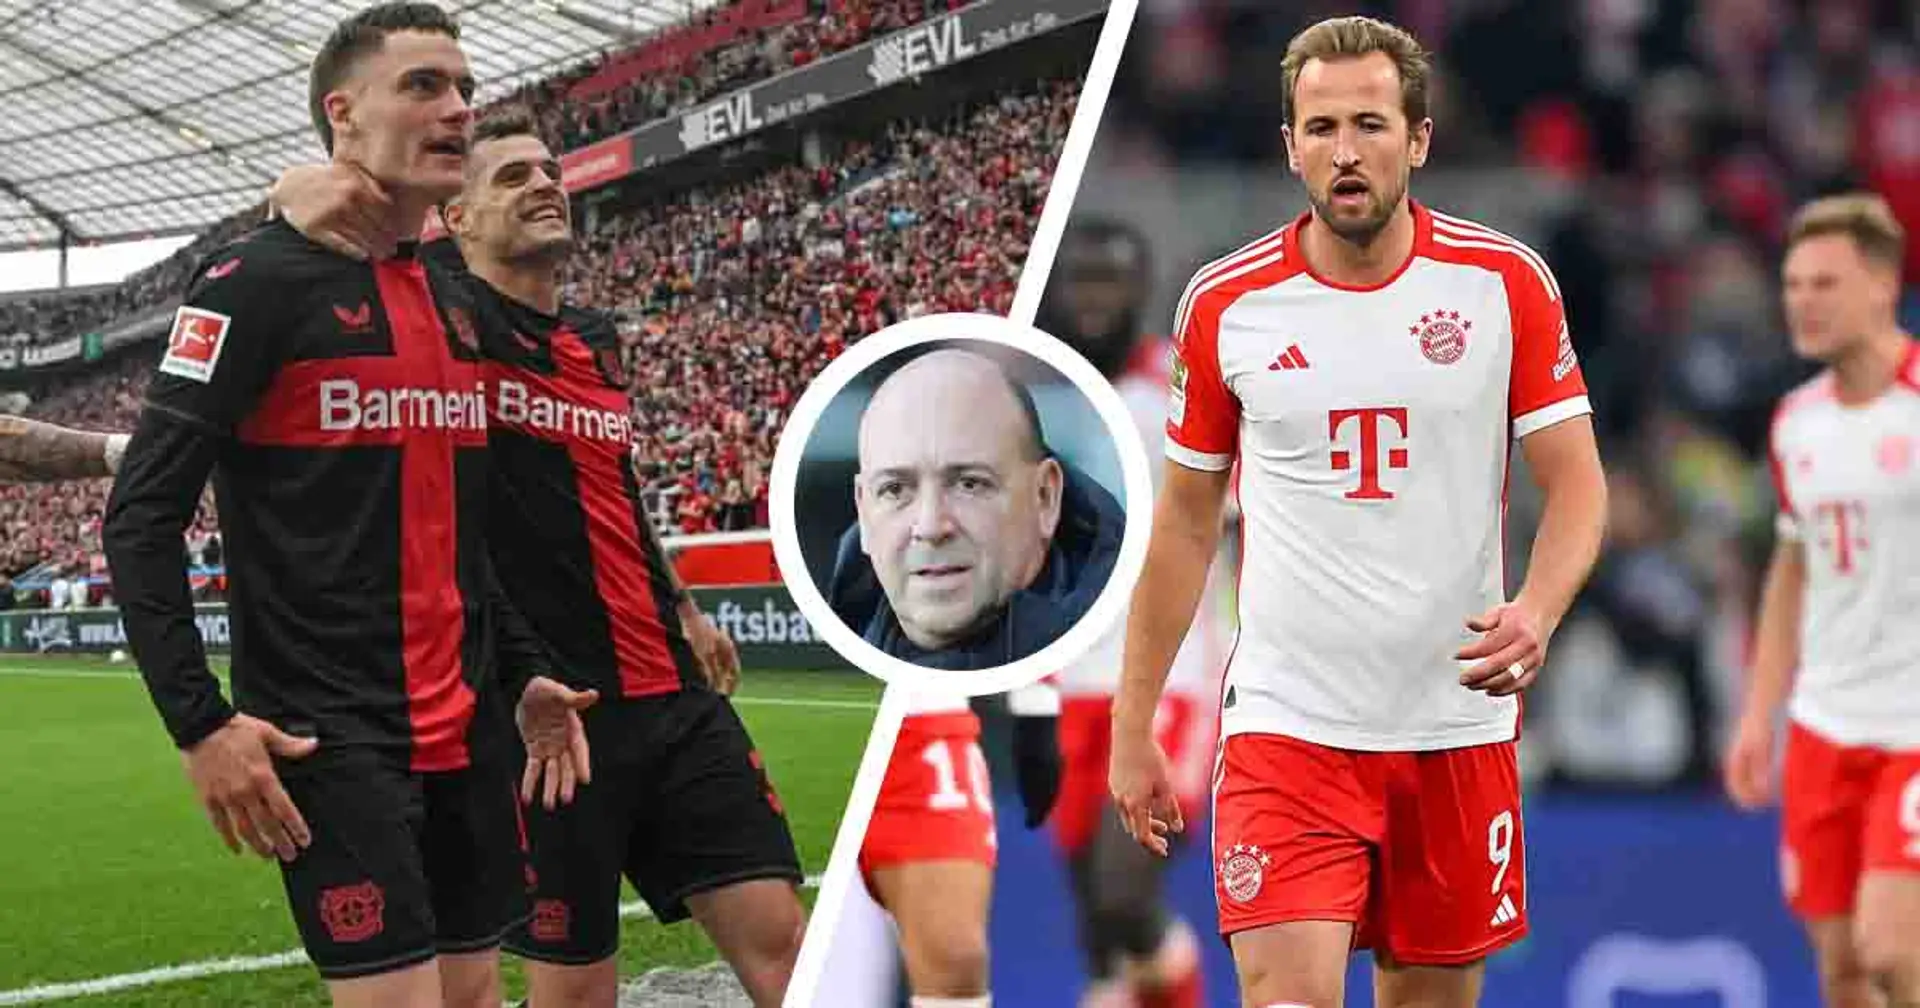 'They can be strong': Bayer Leverkusen CEO tips RB Leipzig to be bigger Bundesliga title threat than Bayern Munich next season